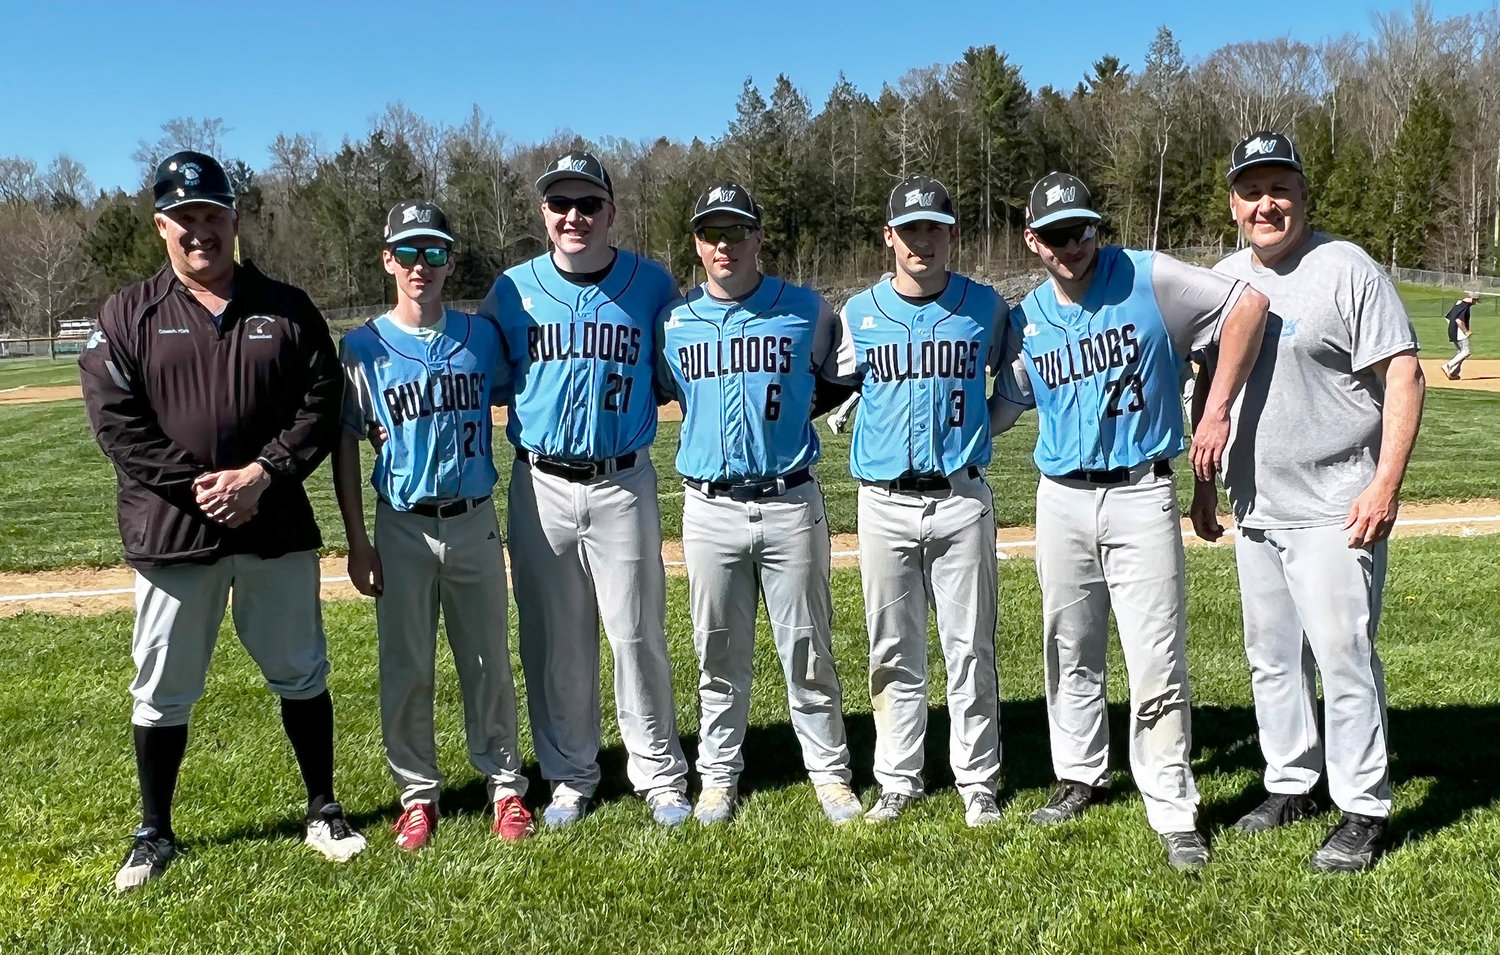 Sullivan West seniors were recognized before the game. (Left to right) Head coach Bill Kirk, Dominic Perez, Jake Nystrom, Gavin Hauschild, Justin Grund, Ryan Sayers and Assistant Coach Scott Haberli.